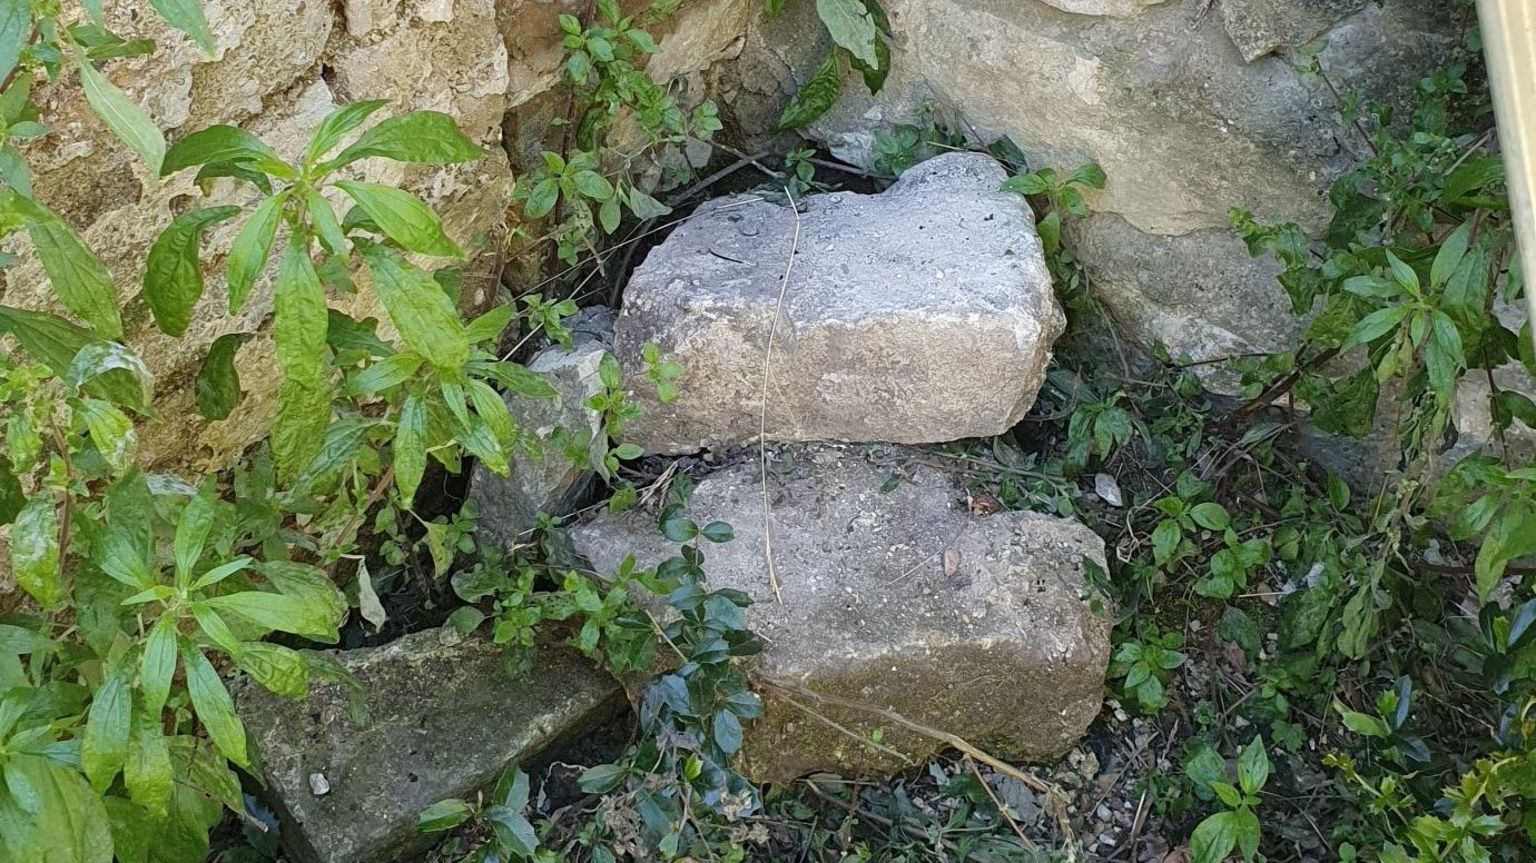 Several stone bricks sit in a pile at the base of a wall. There is green undergrowth surrounding them.